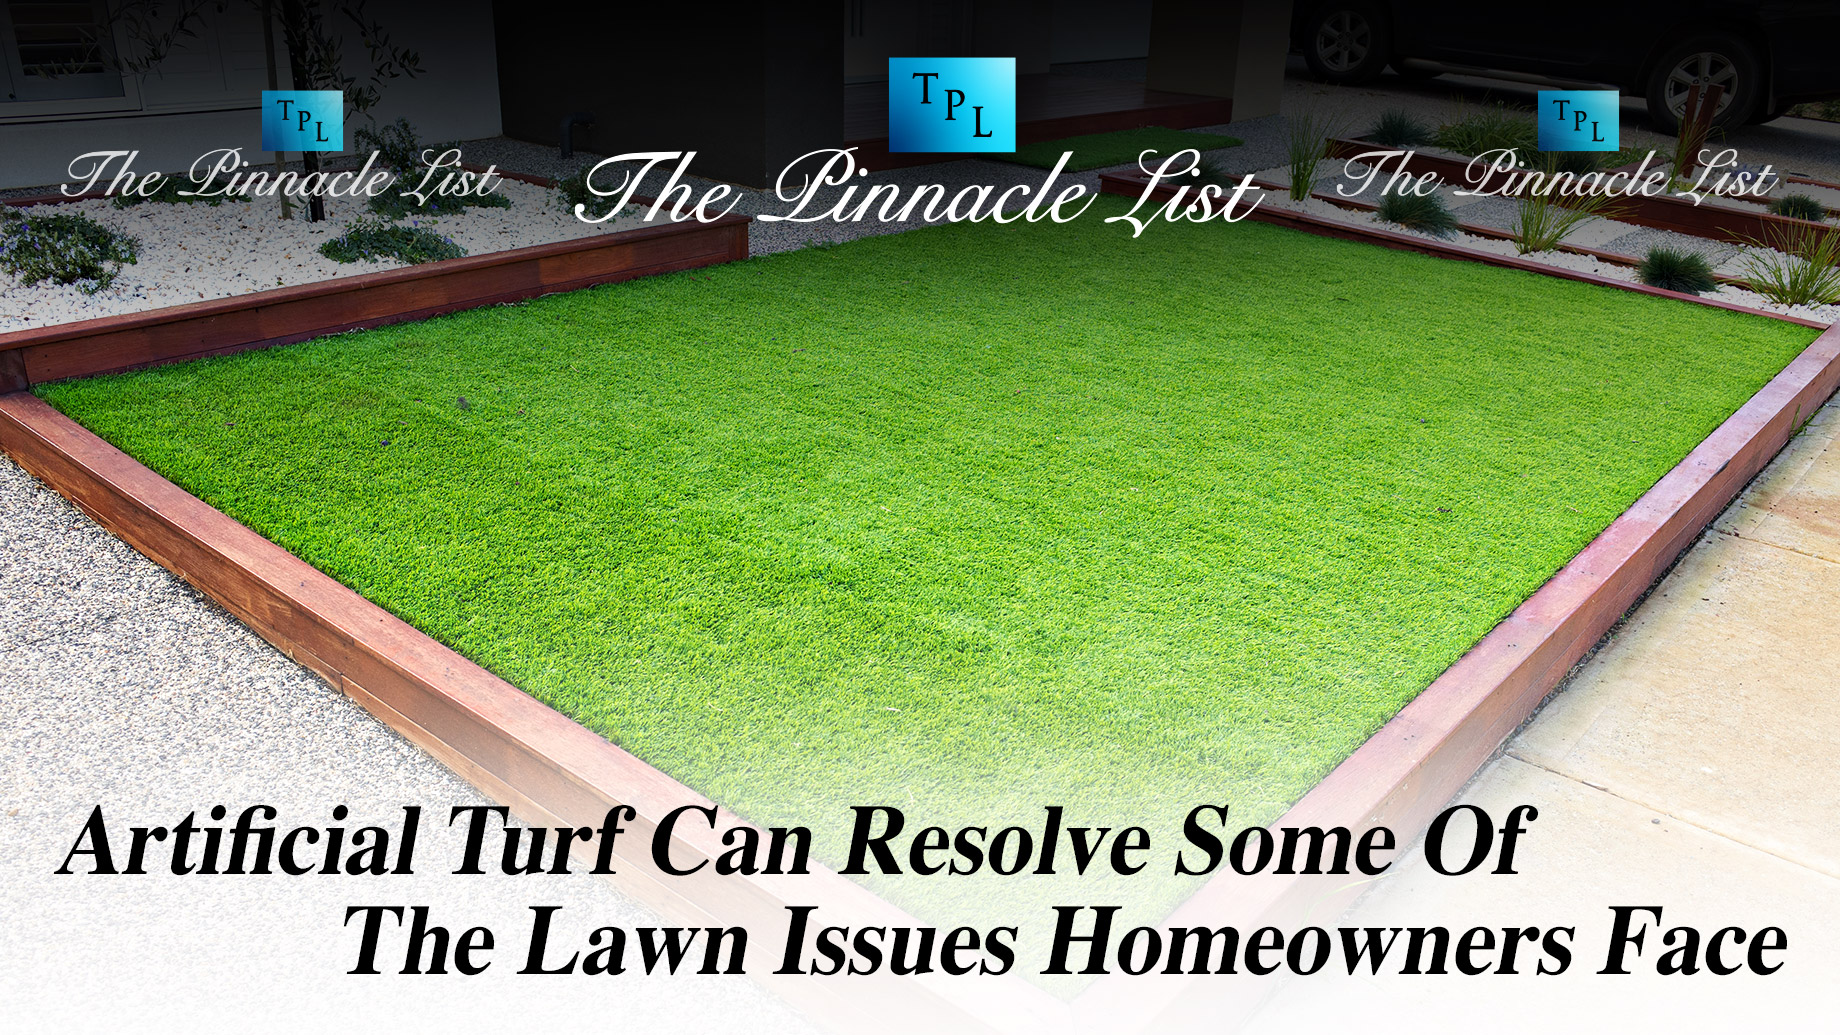 Artificial Turf Can Resolve Some Of The Lawn Issues Homeowners Face